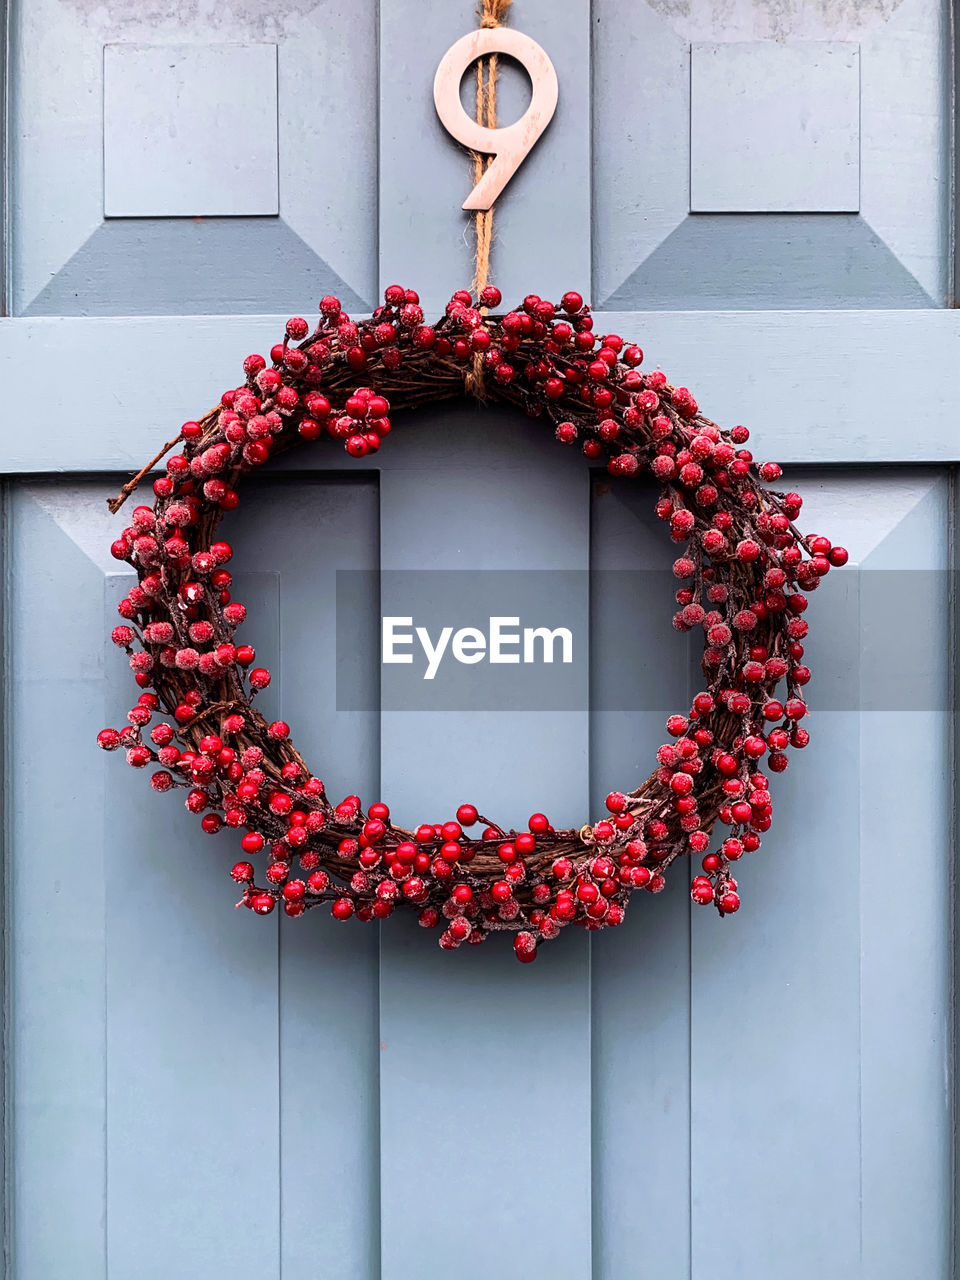 Elegant christmas wreath decorated red berries and tree sticks on a blue wooden door